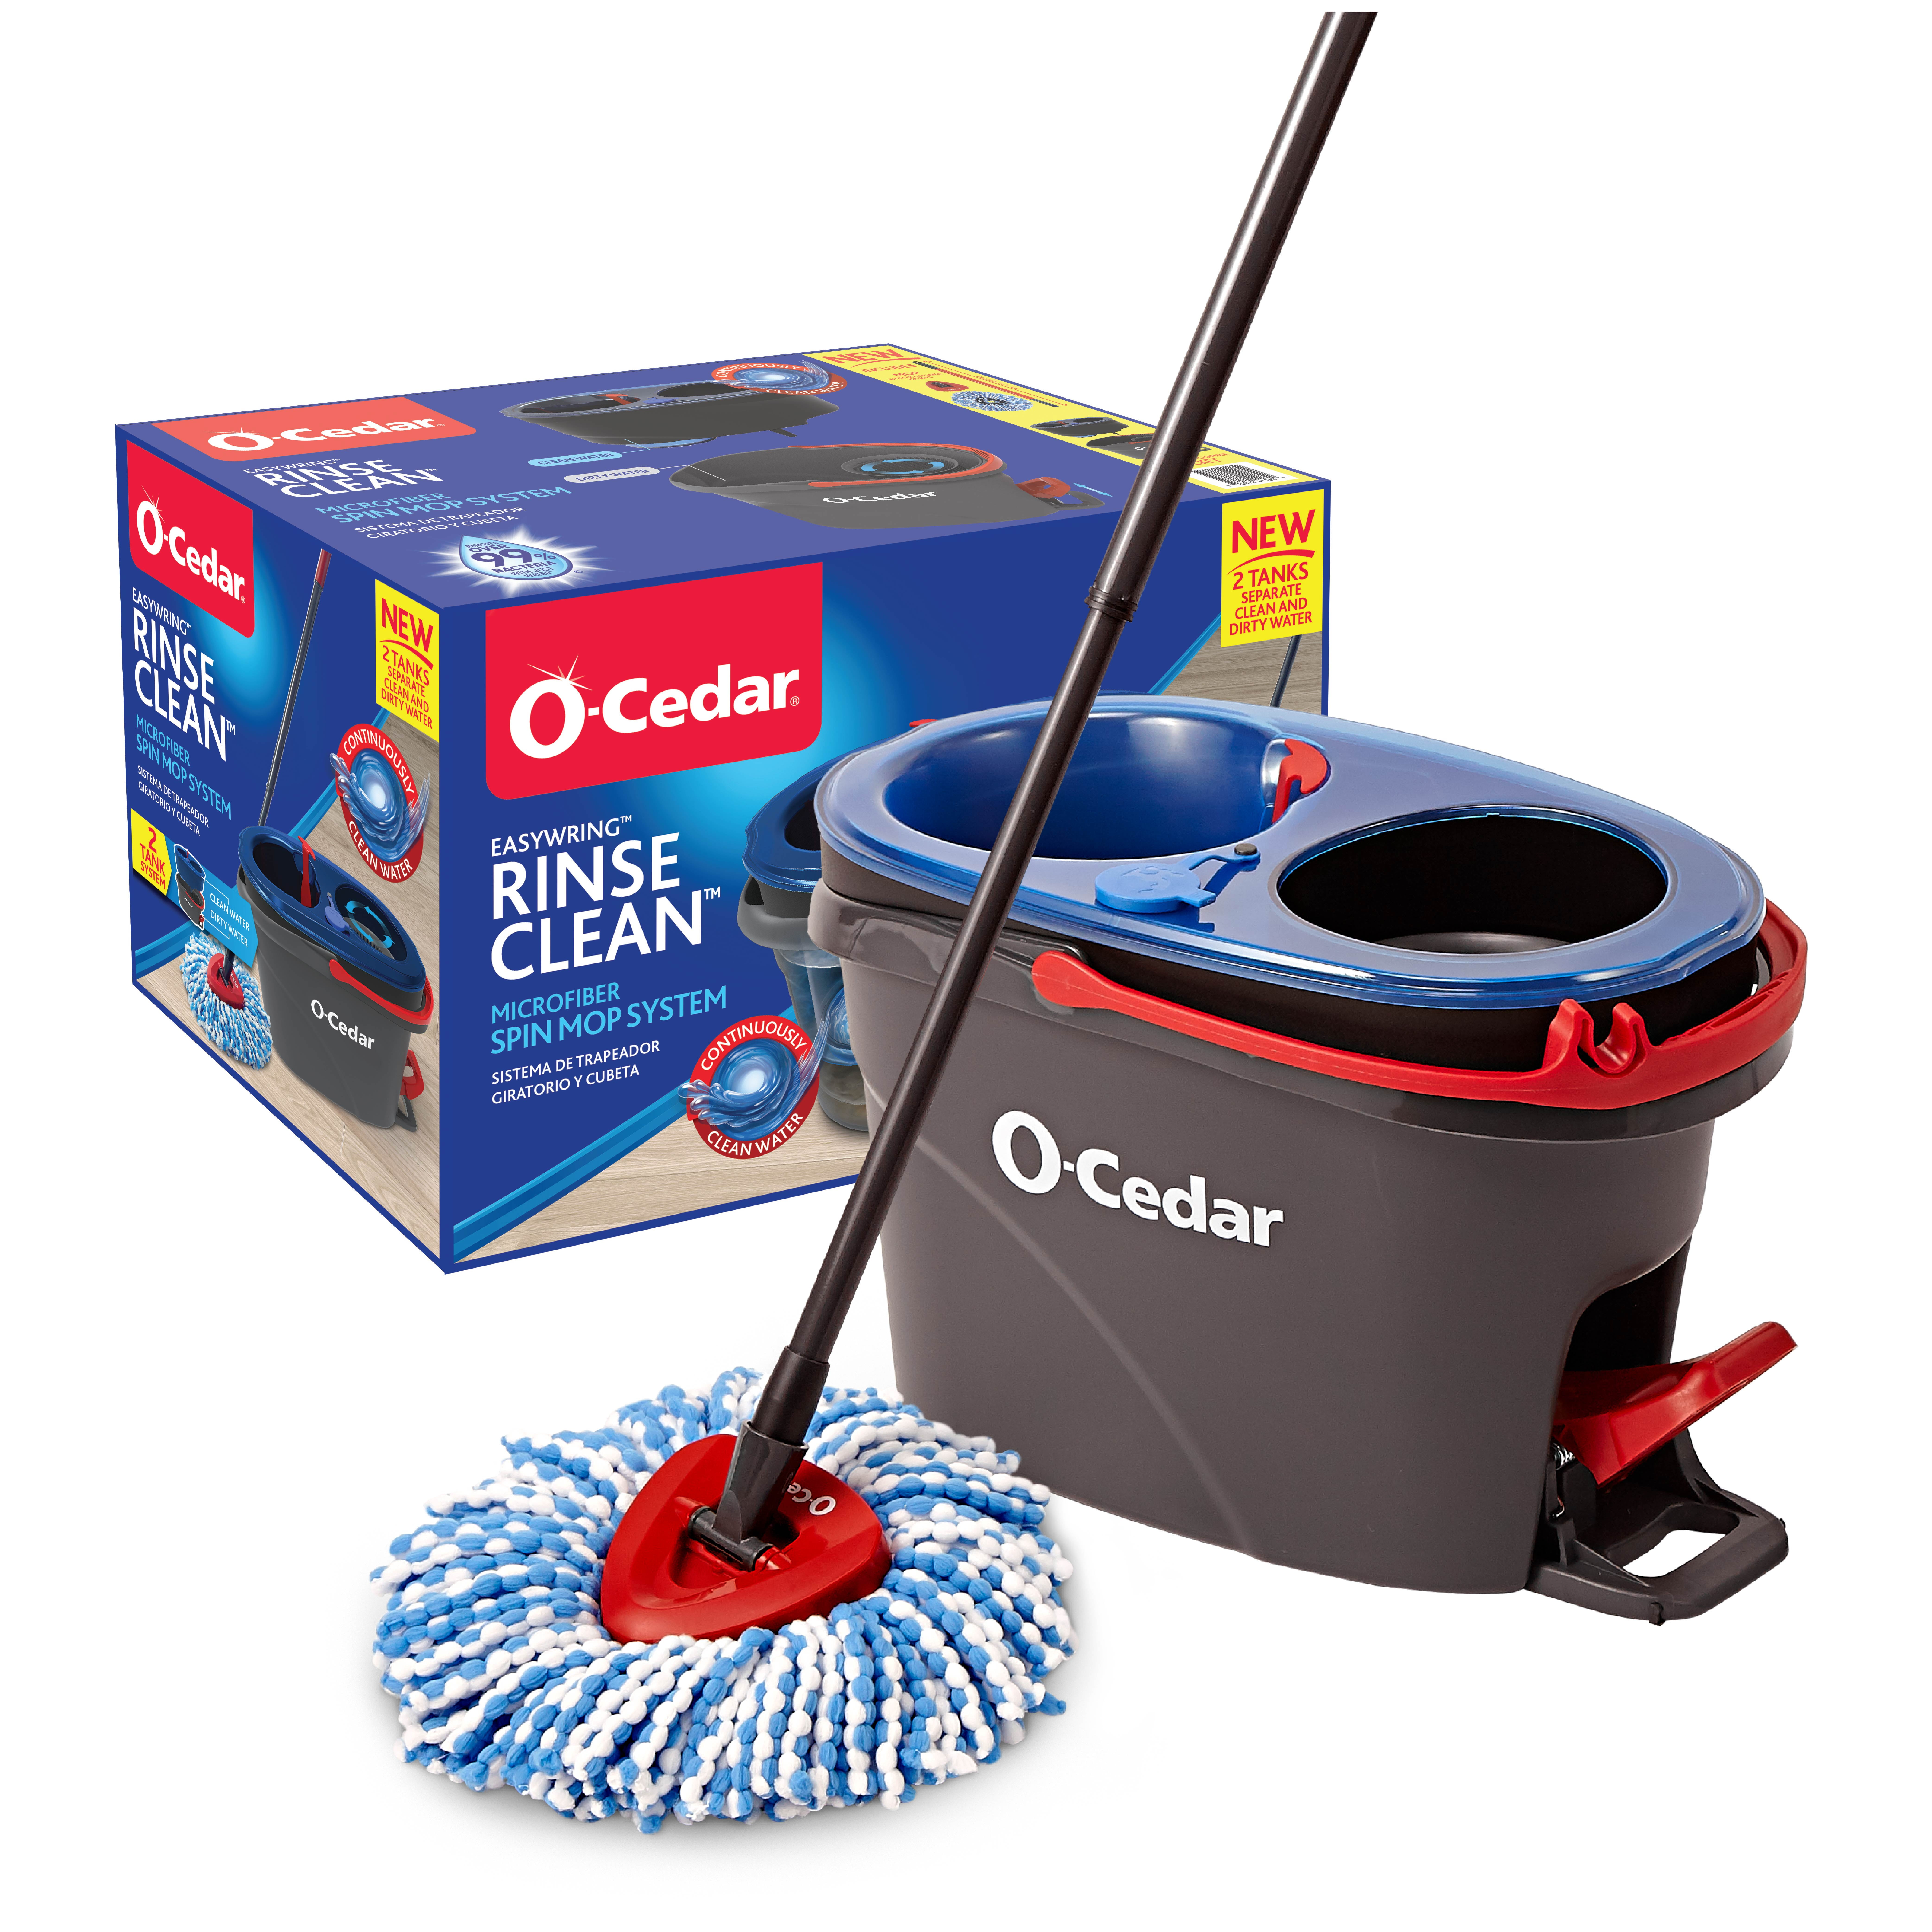 O-Cedar EasyWring RinseClean Spin Mop and Bucket System, Hands